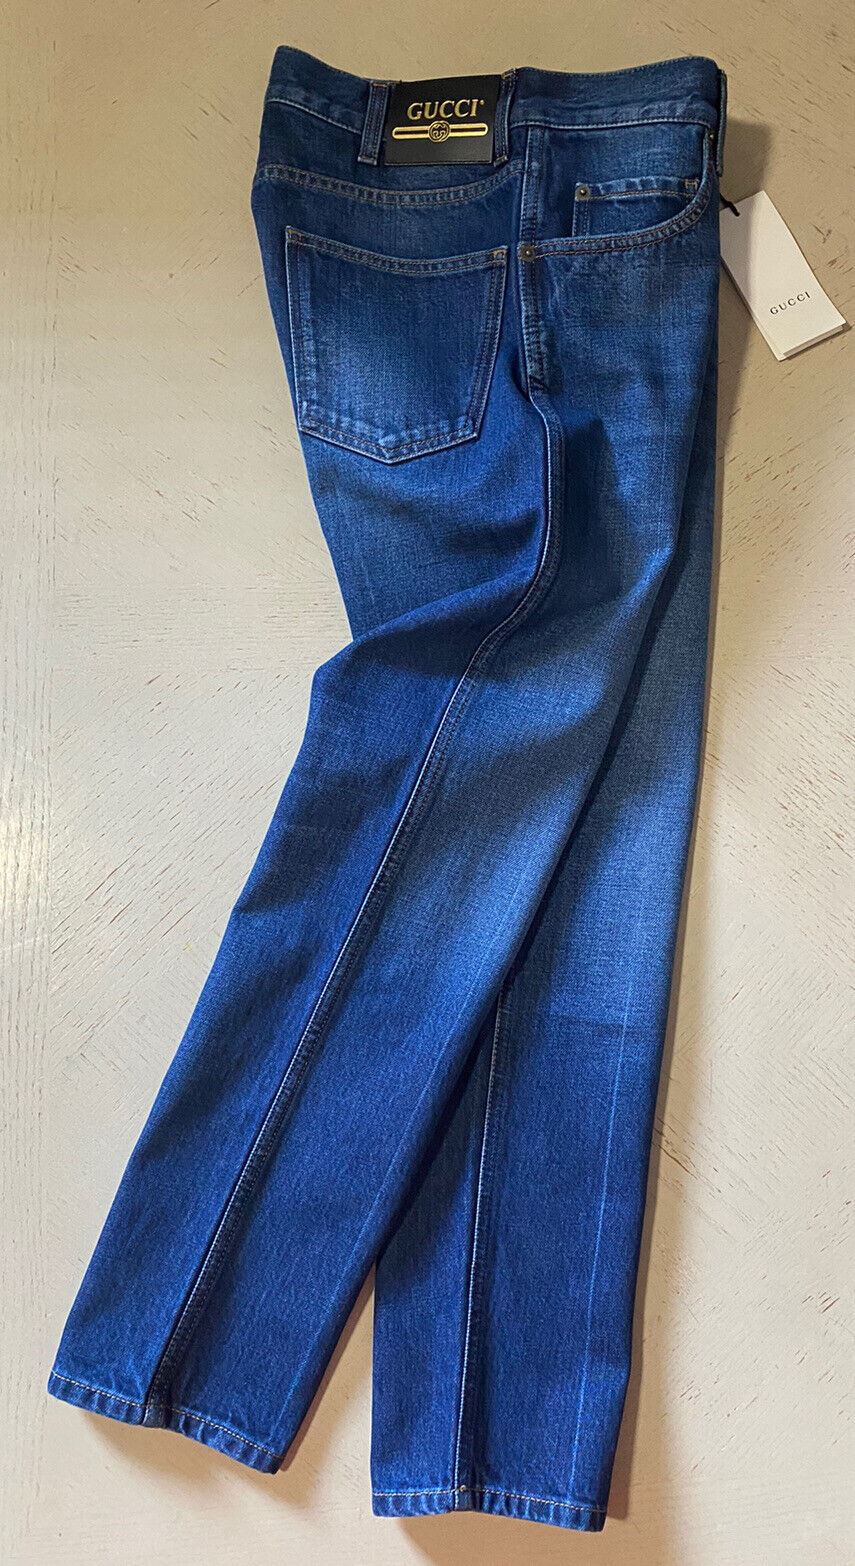 NWT Gucci Men’s Jeans Washed Denim Tapered Pants Blue 30 US Italy